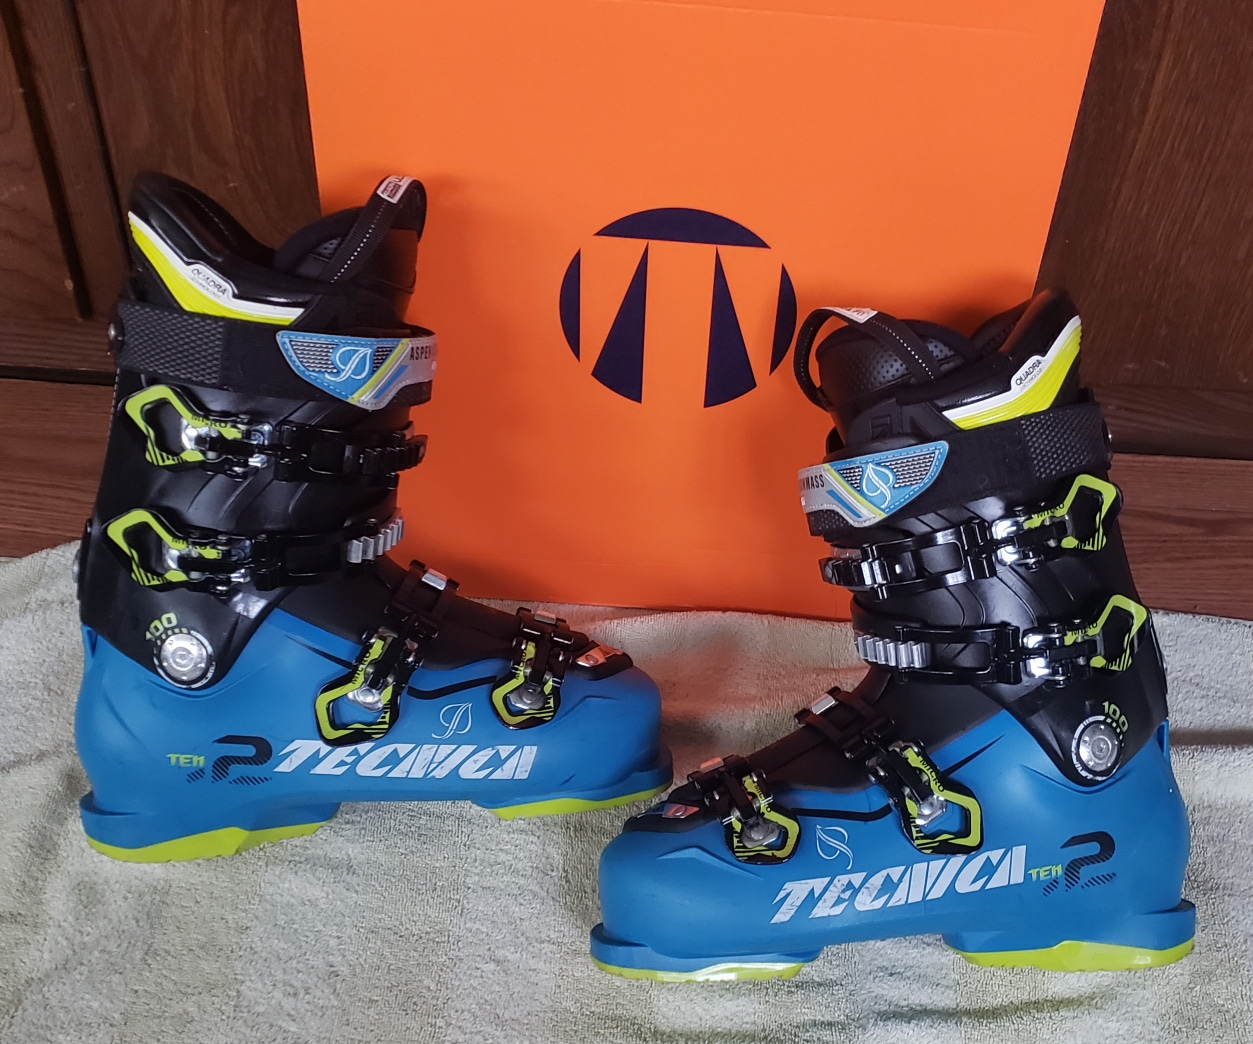 TECNICA TEN 2 100 HV Ski Boots MENS 9 (27.5/316mm) *PRE-OWNED* WASHED & CLEAN 326mm